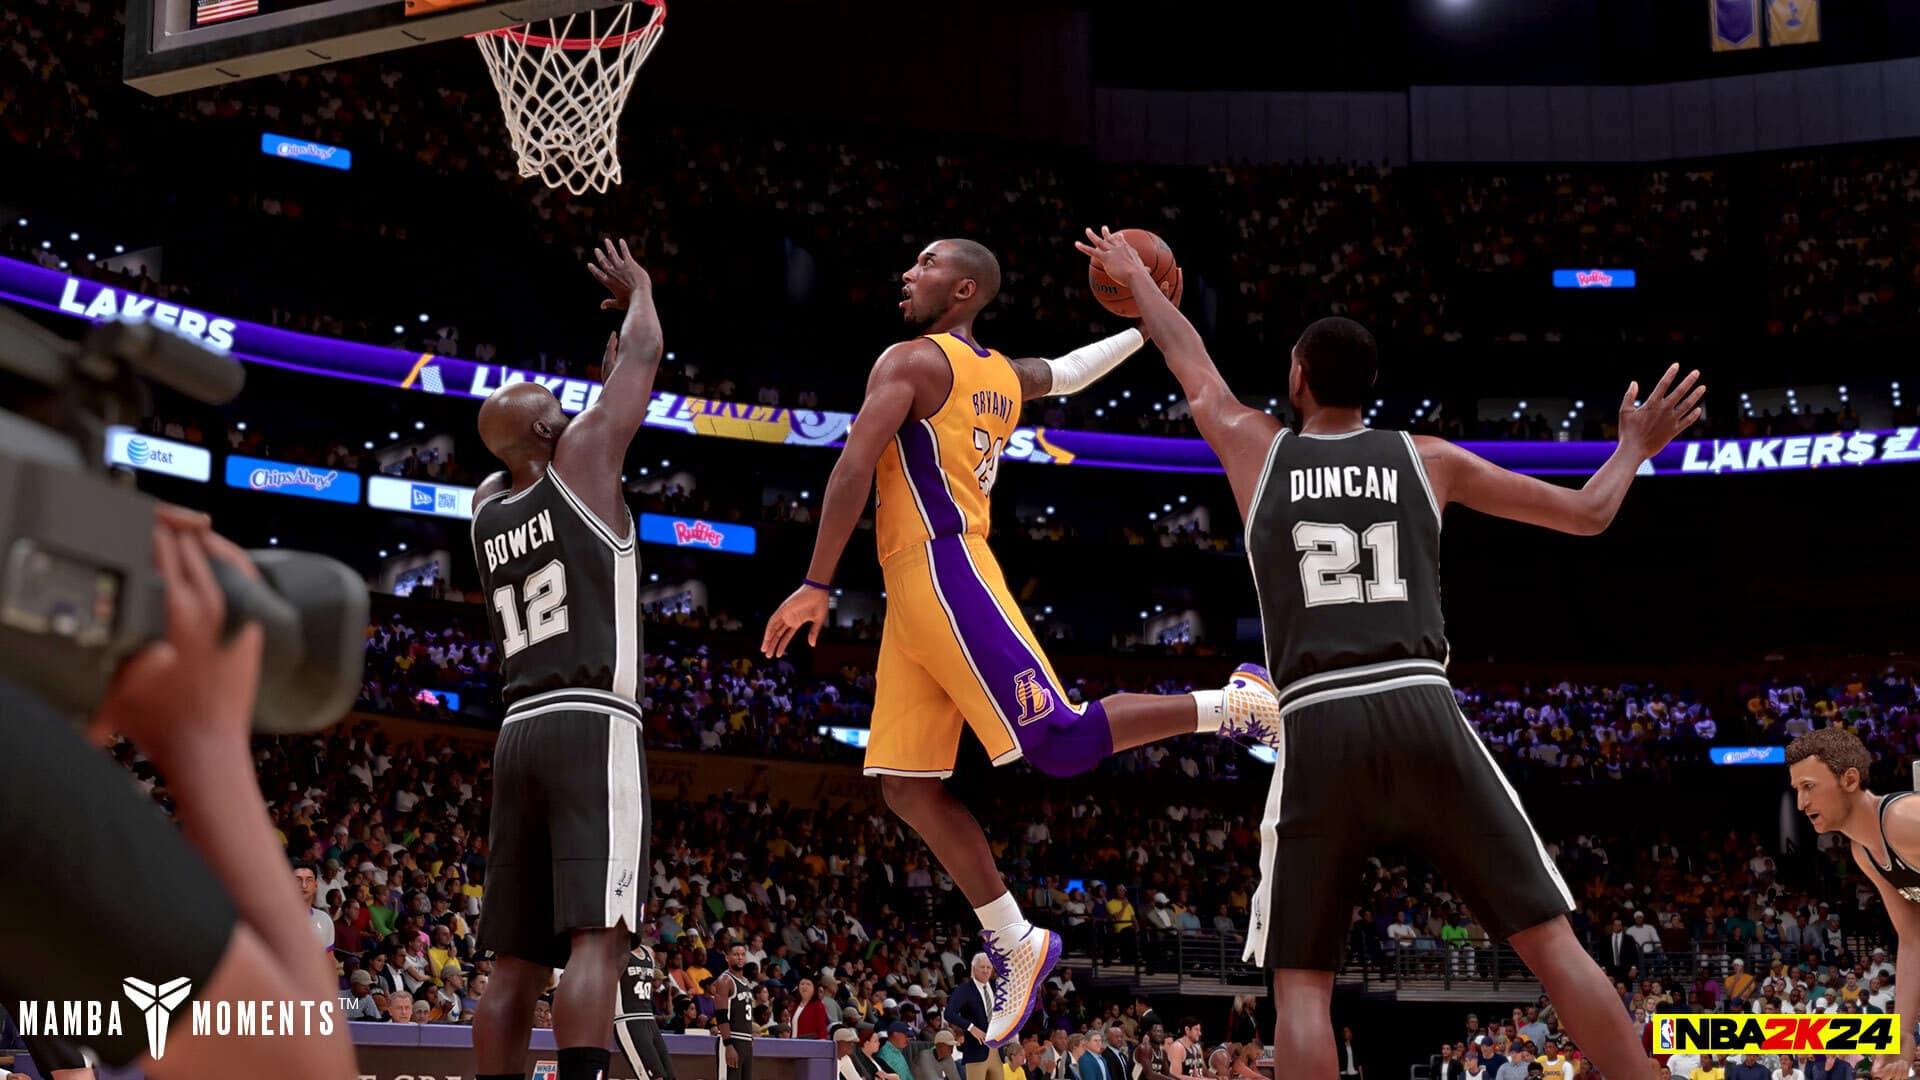 NBA 2K24 cover features late Kobe Bryant